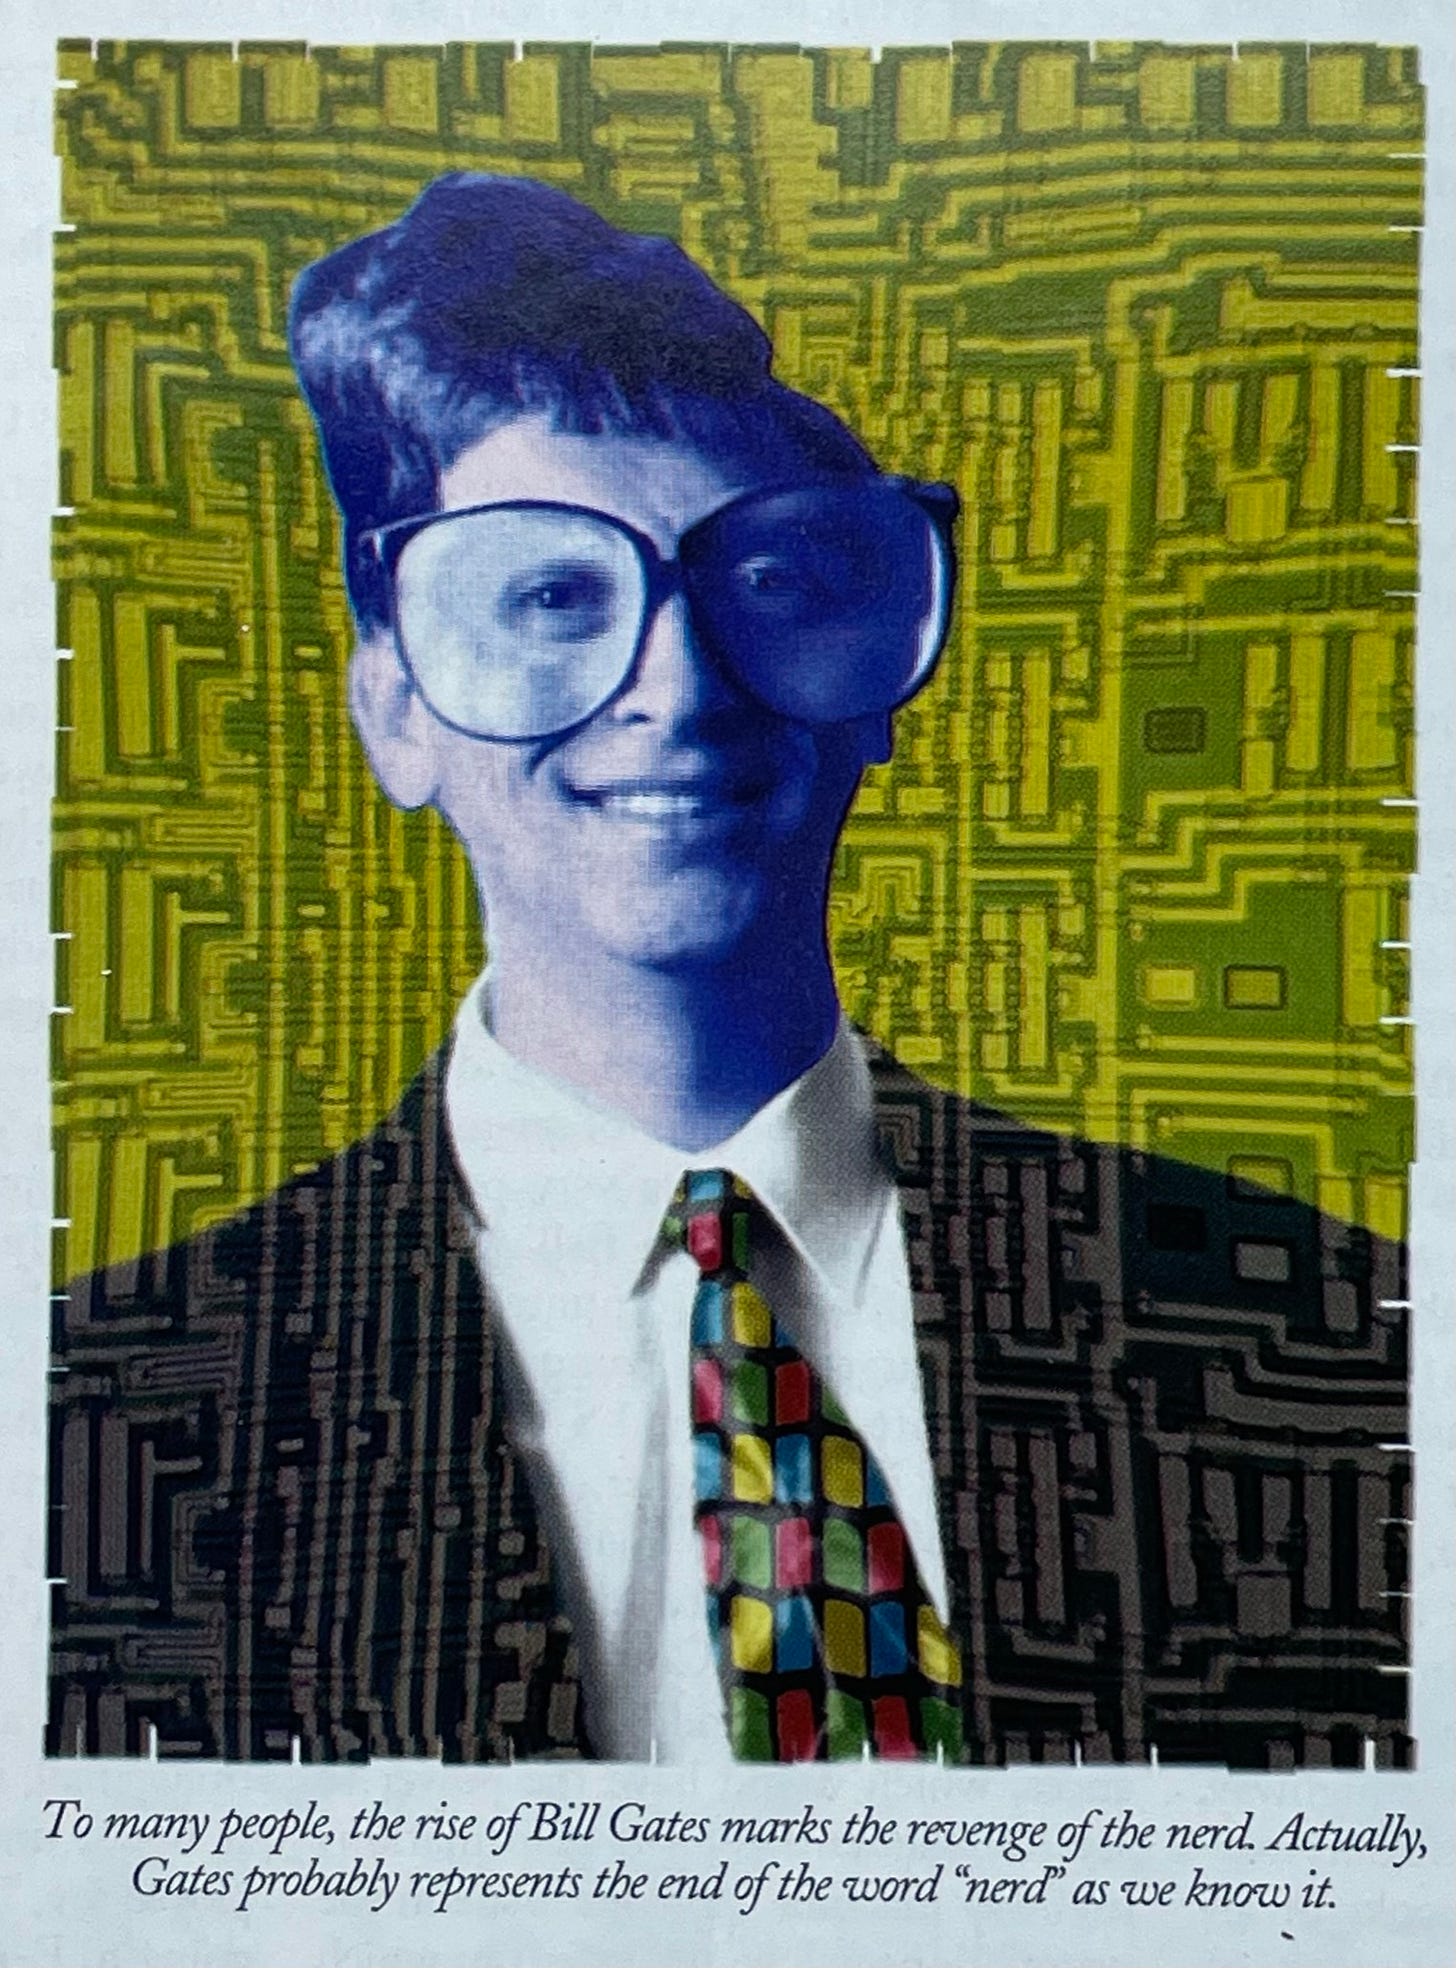 Rendering of Bill Gates from The New Yorker "Email With Bill" article. Very weird.